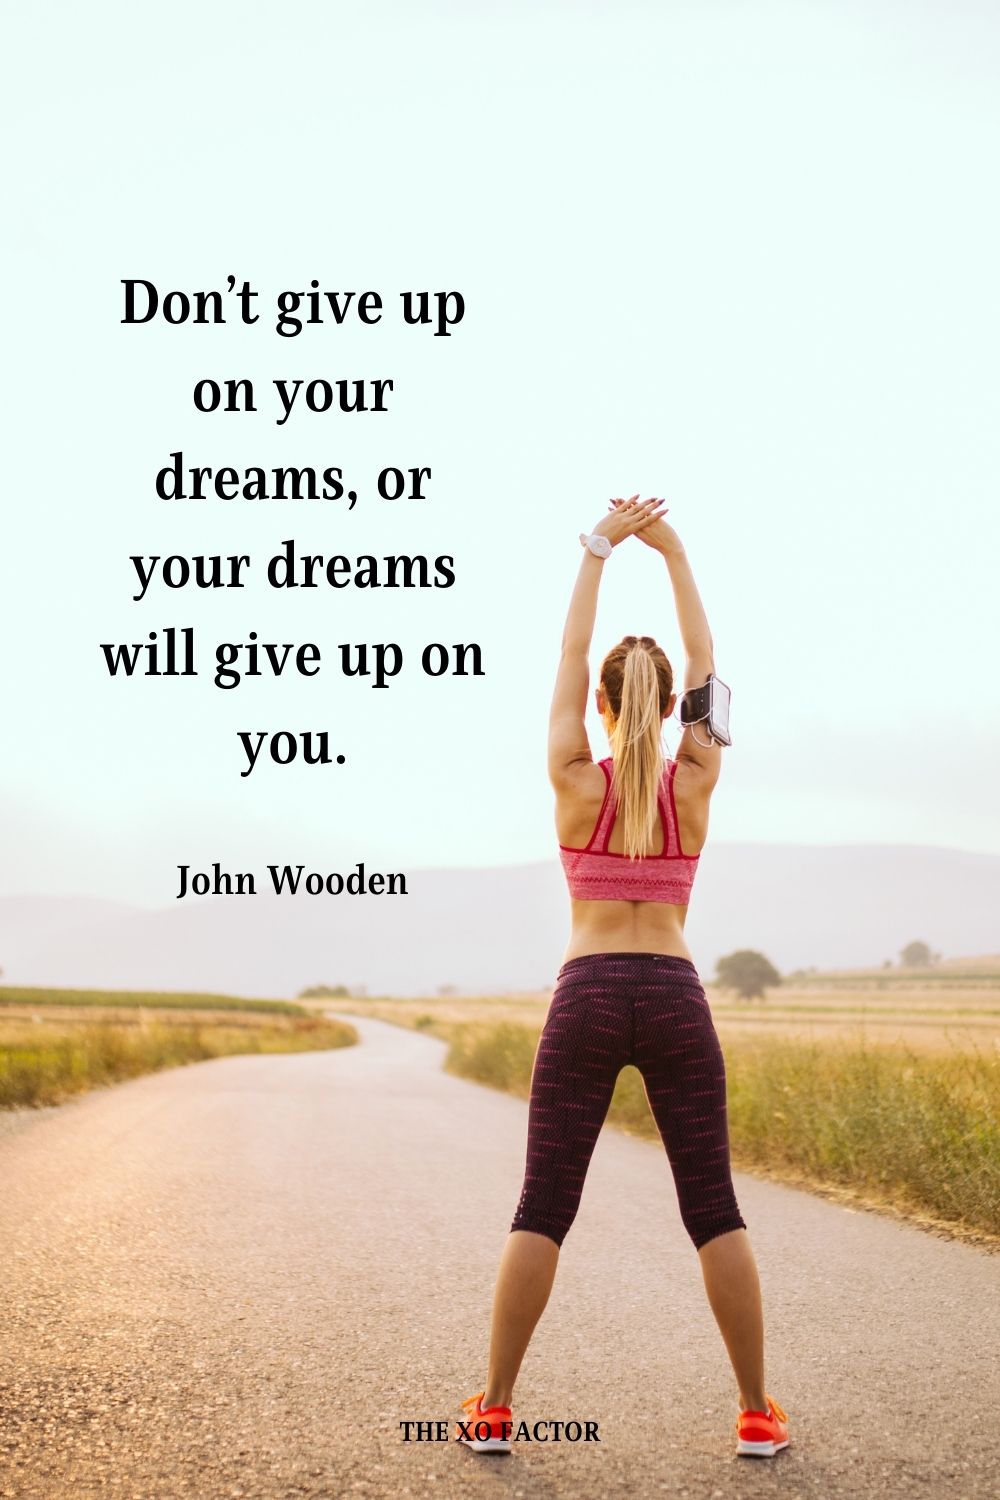 Don’t give up on your dreams, or your dreams will give up on you. John Wooden